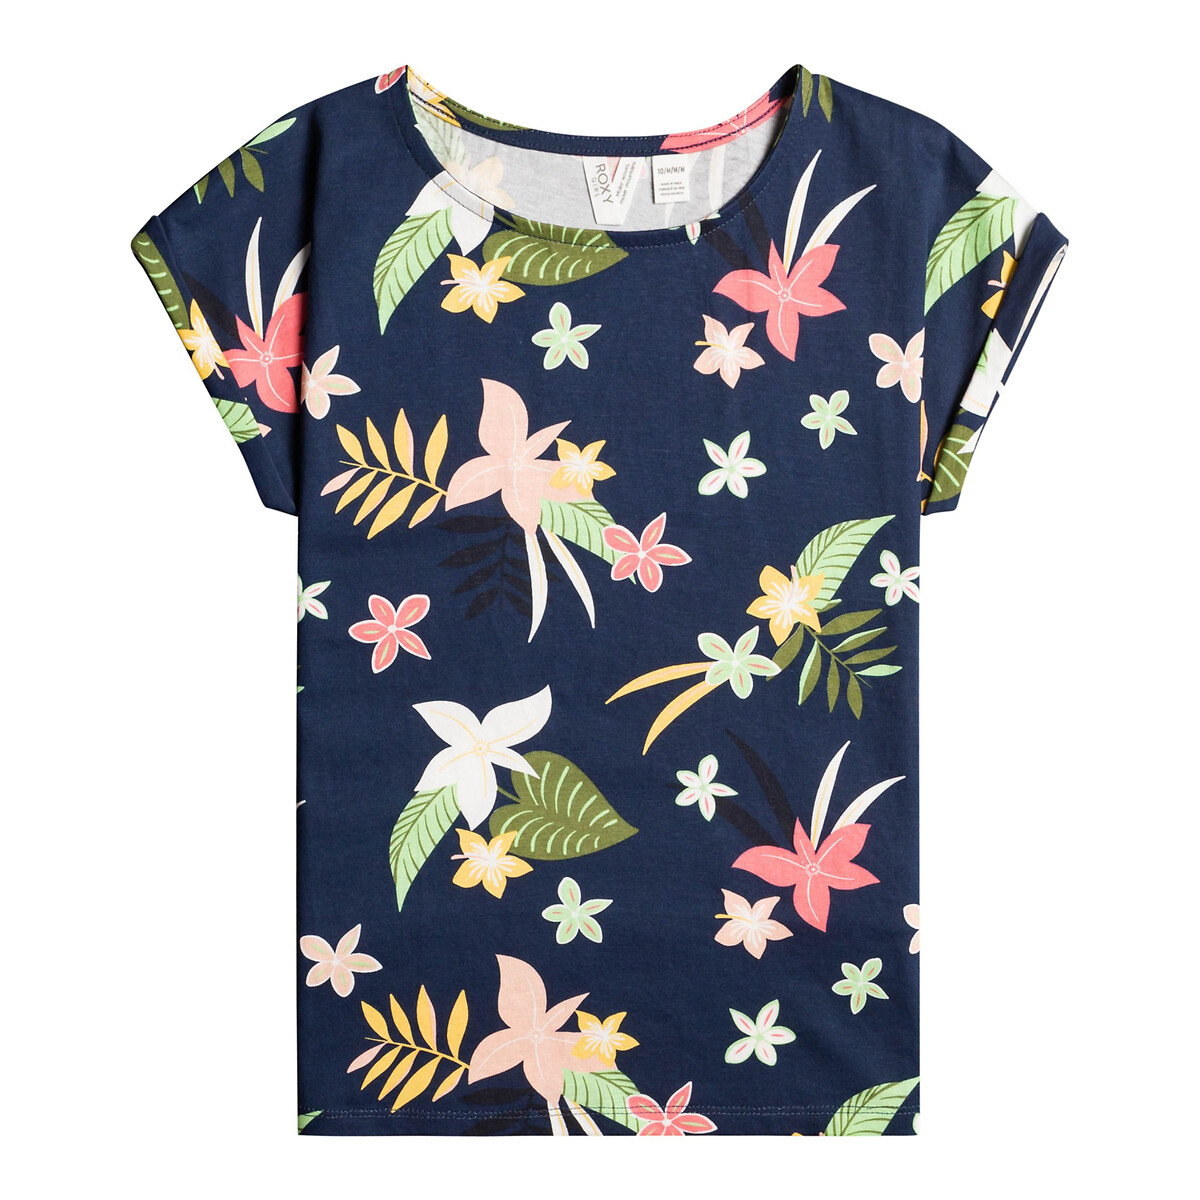 Image of Floral Print Cotton T-Shirt with Short Sleeves